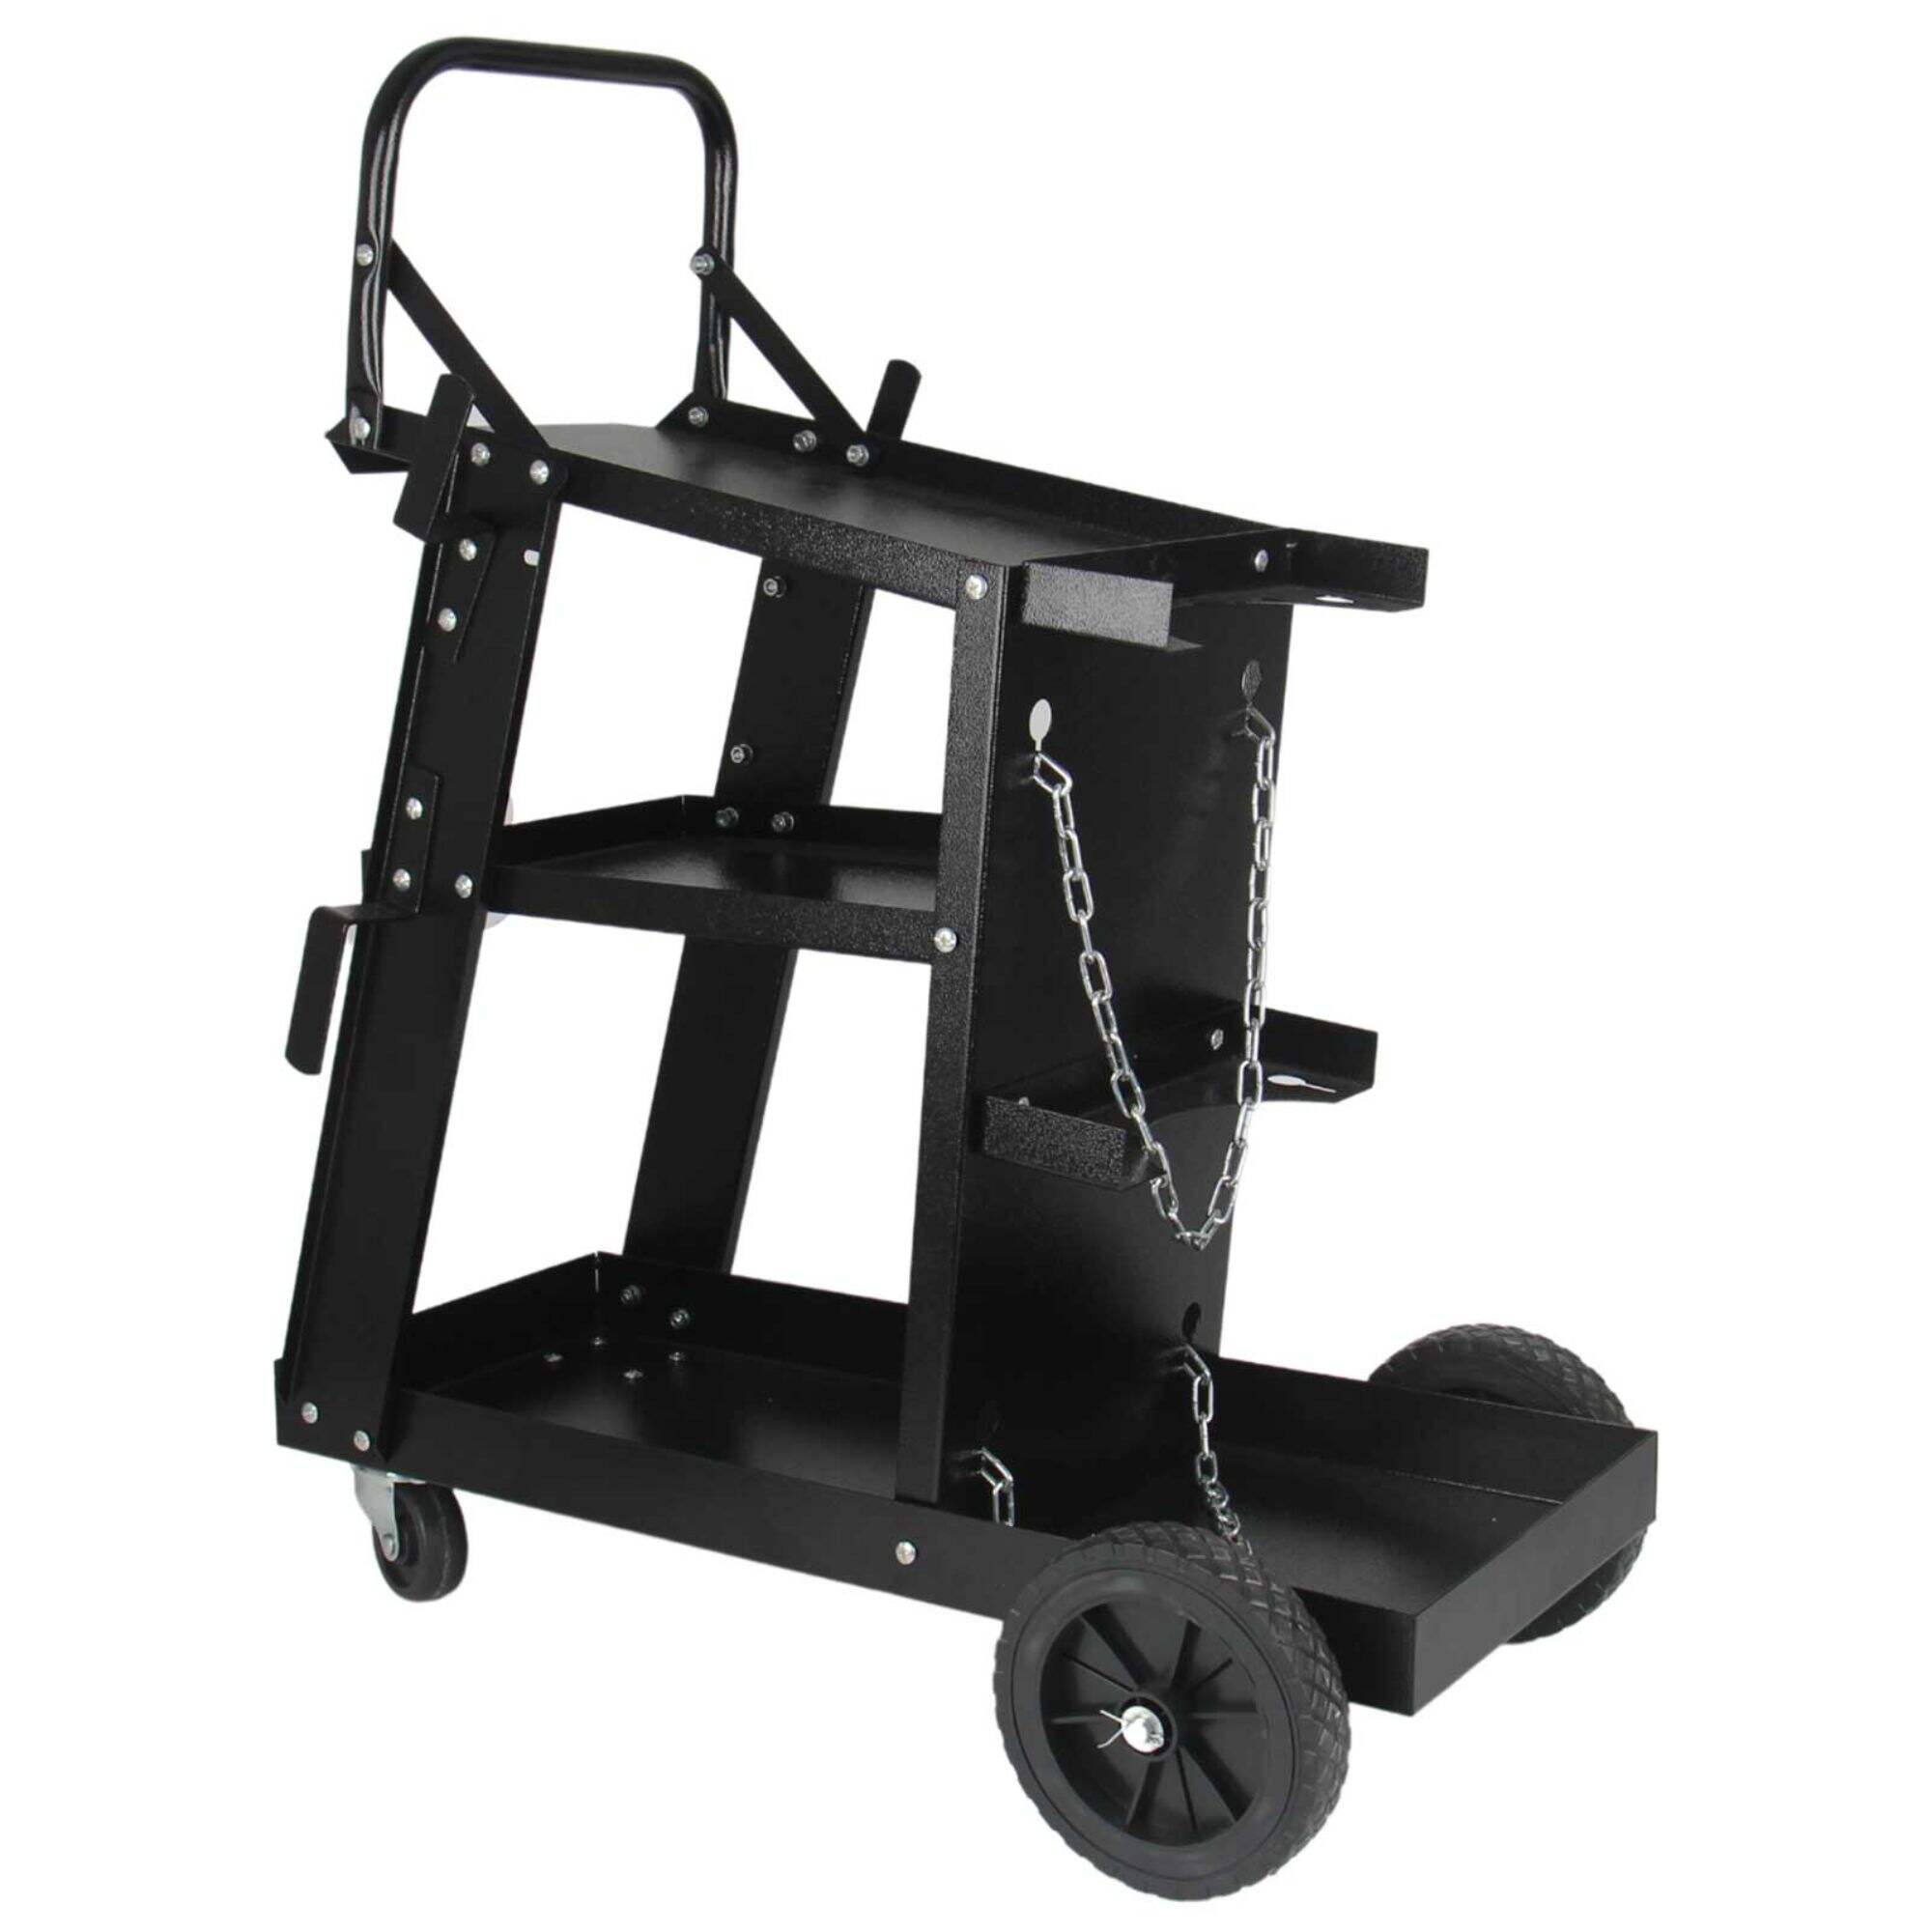 WT4220 Heavy Duty Rolling Welding Trolley Cart, Three-Layer Large Storage, for TIG MIG Welder and Plasma Cutter